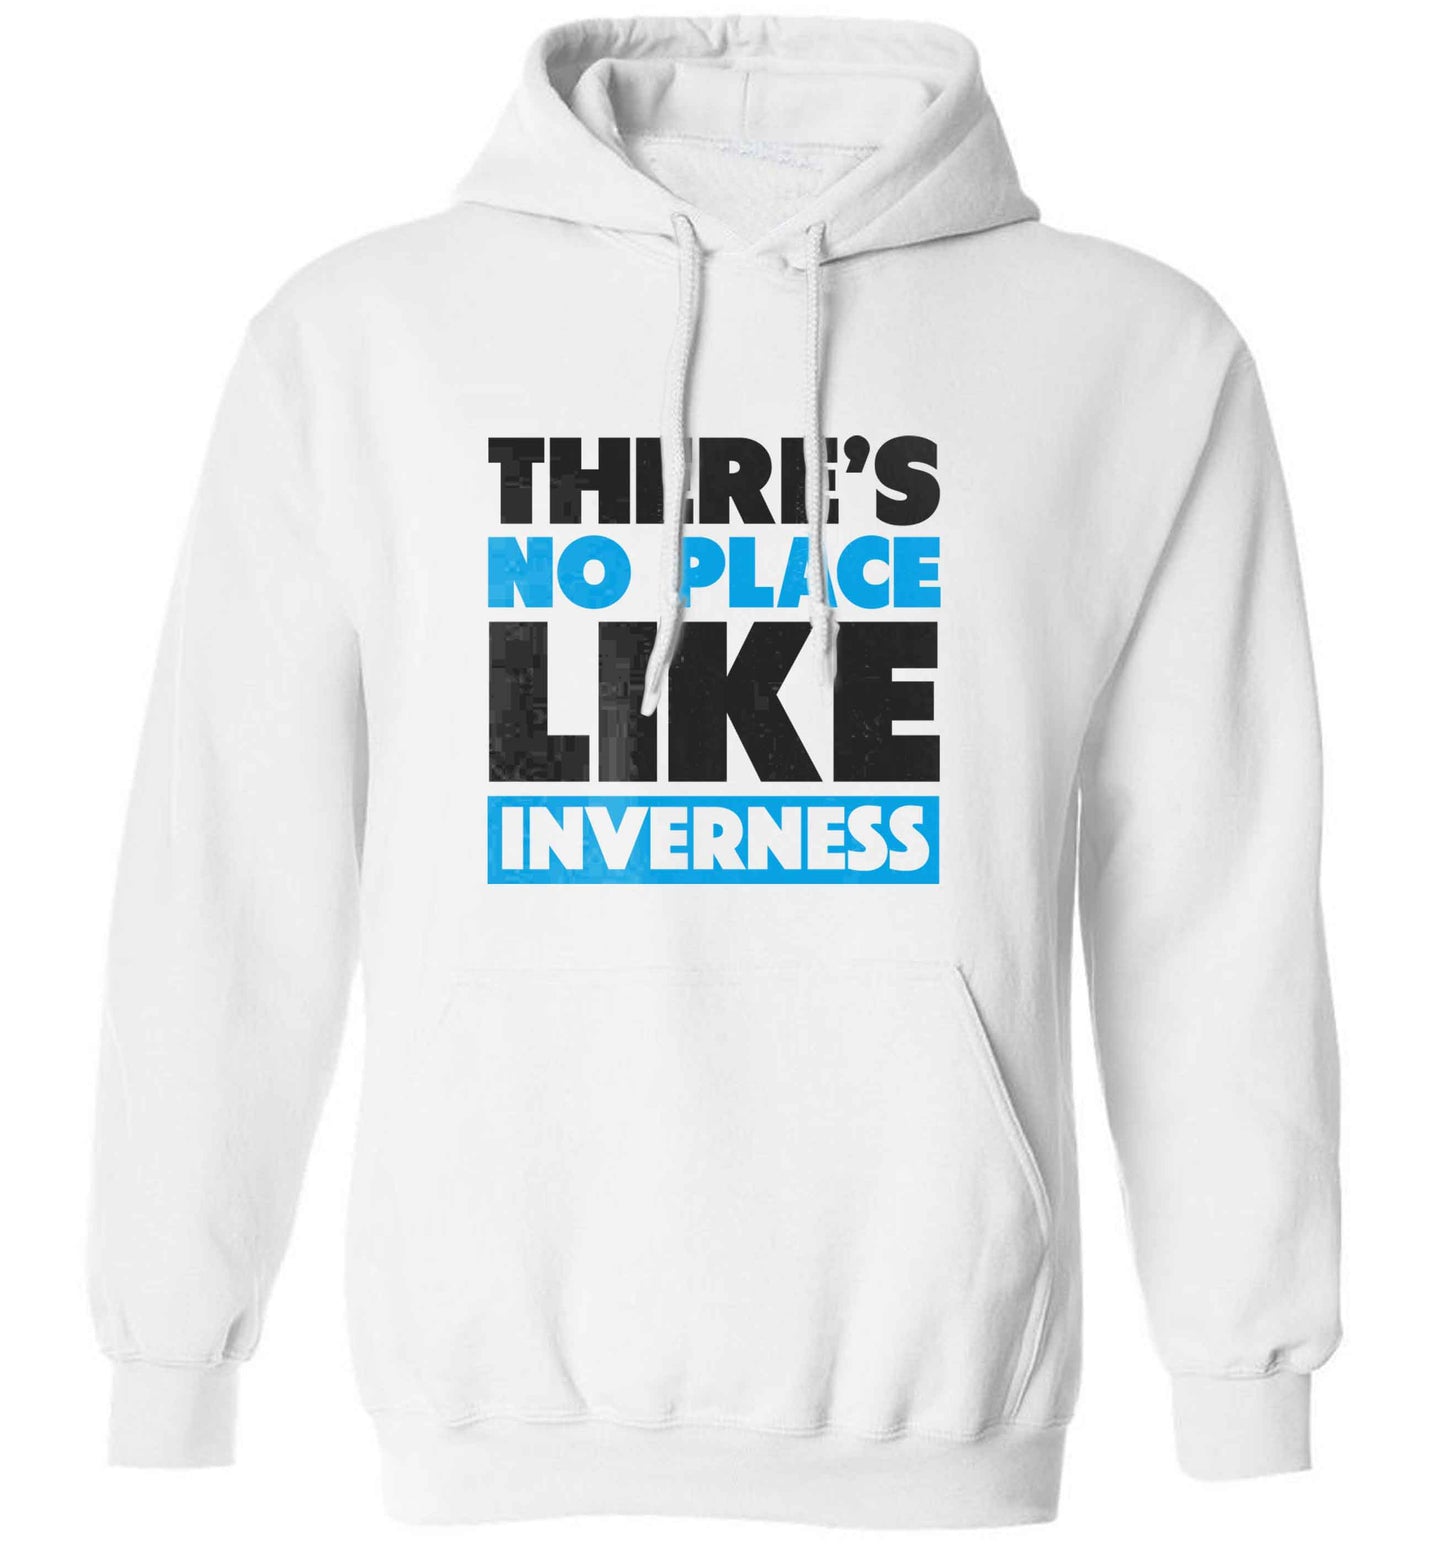 There's no place like Inverness adults unisex white hoodie 2XL